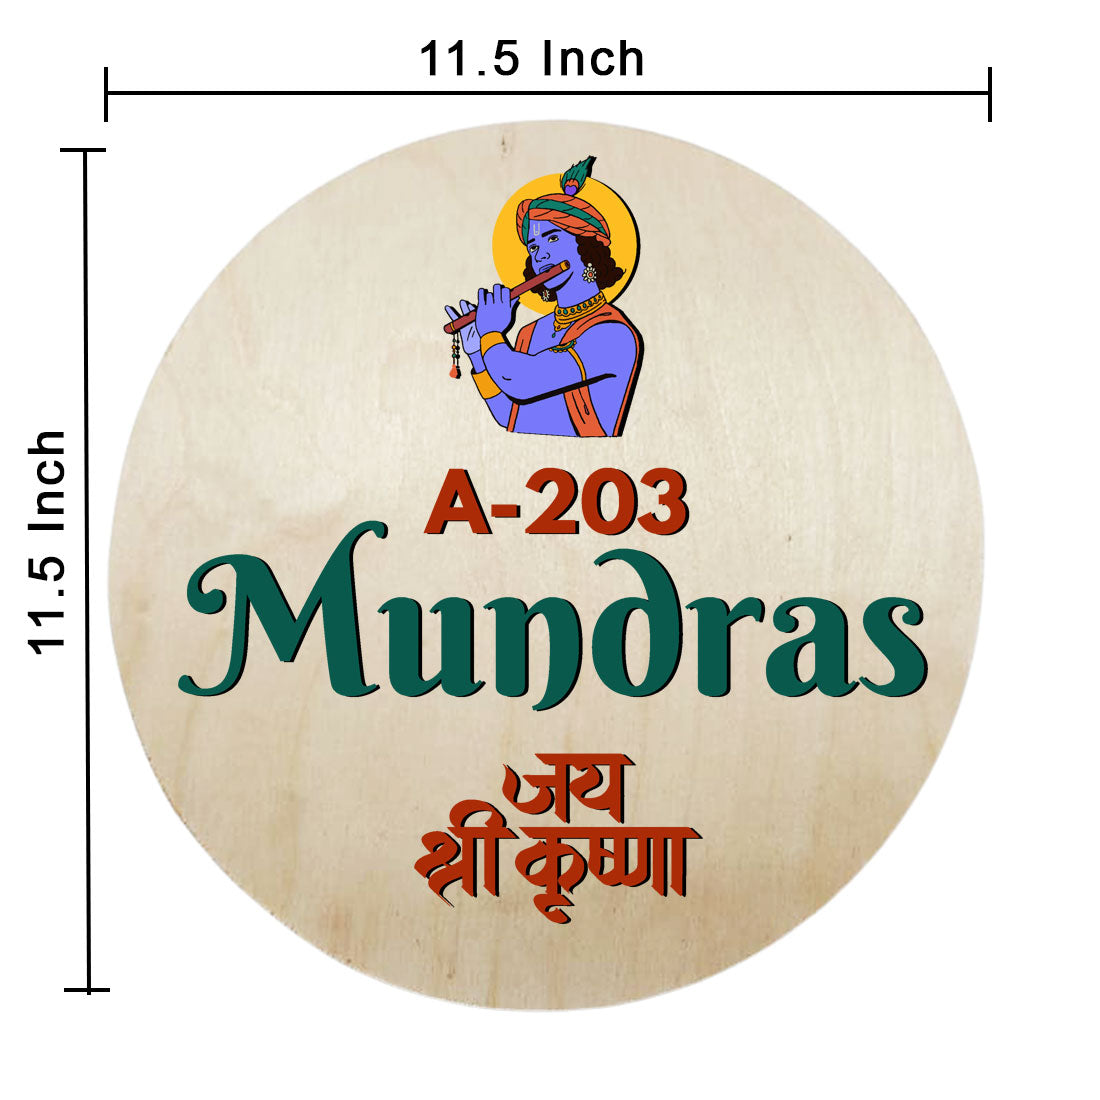 Krishna Name Plate Round Nameplate with Shri Krishna - Available in Wood and Acrylic